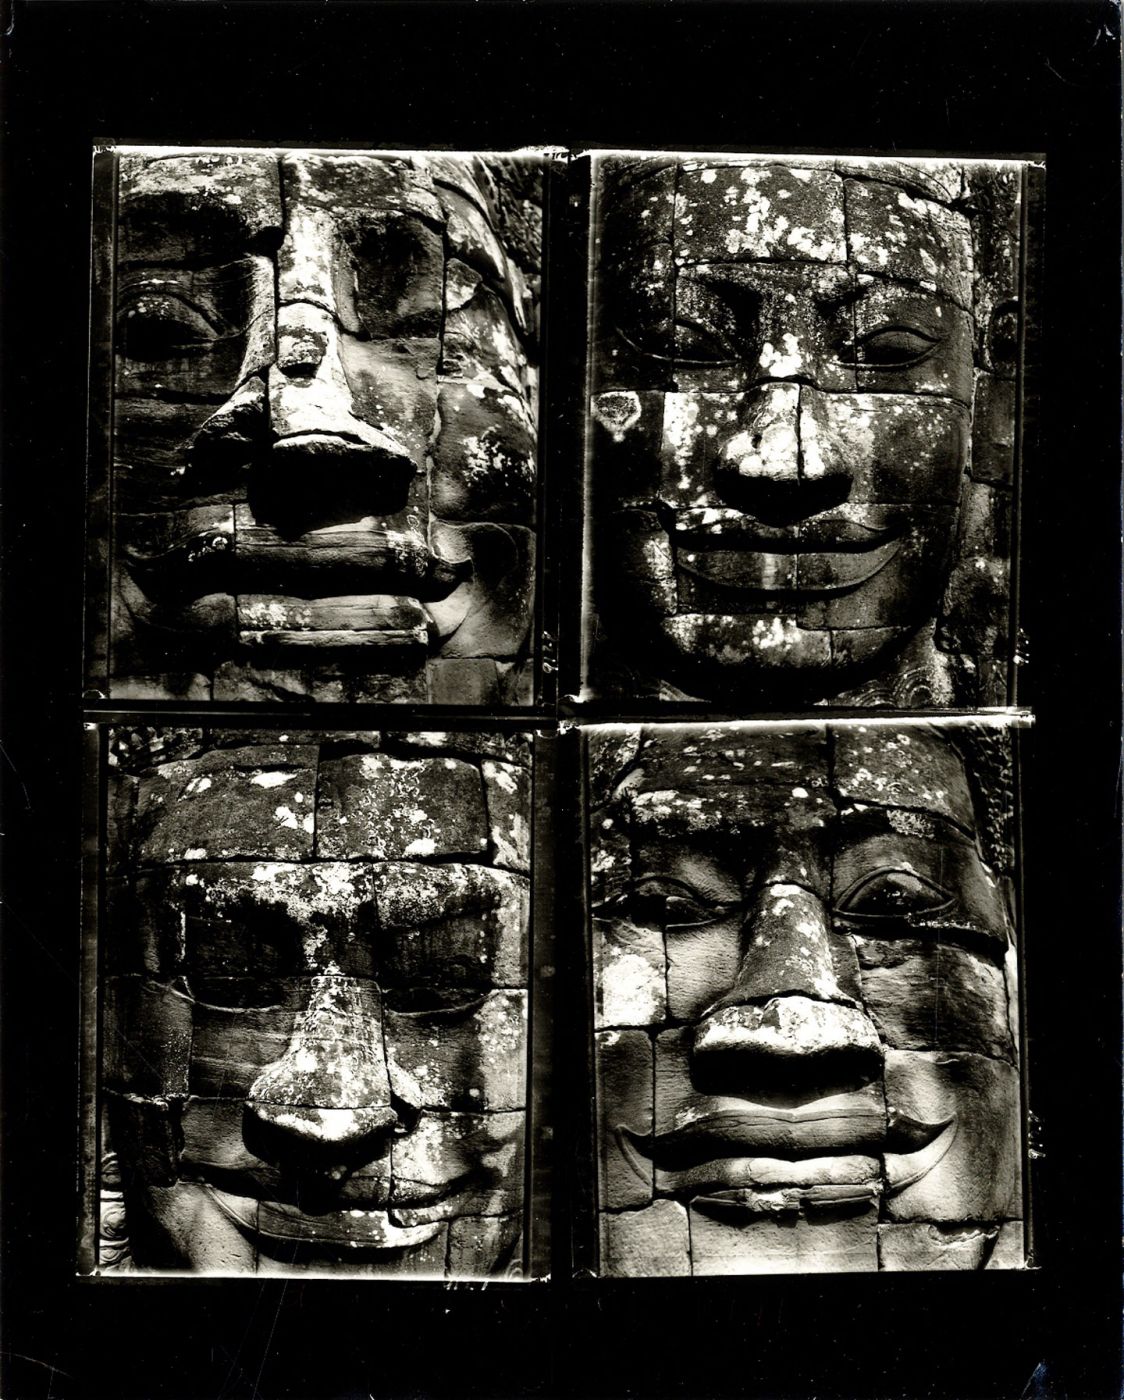 Bill Burke: "Four Faces at the Bayon, 1991" Vintage Toned Gelatin Silver Contact Print of Four Polaroid Negatives (10x8" Printed on AZO Paper)